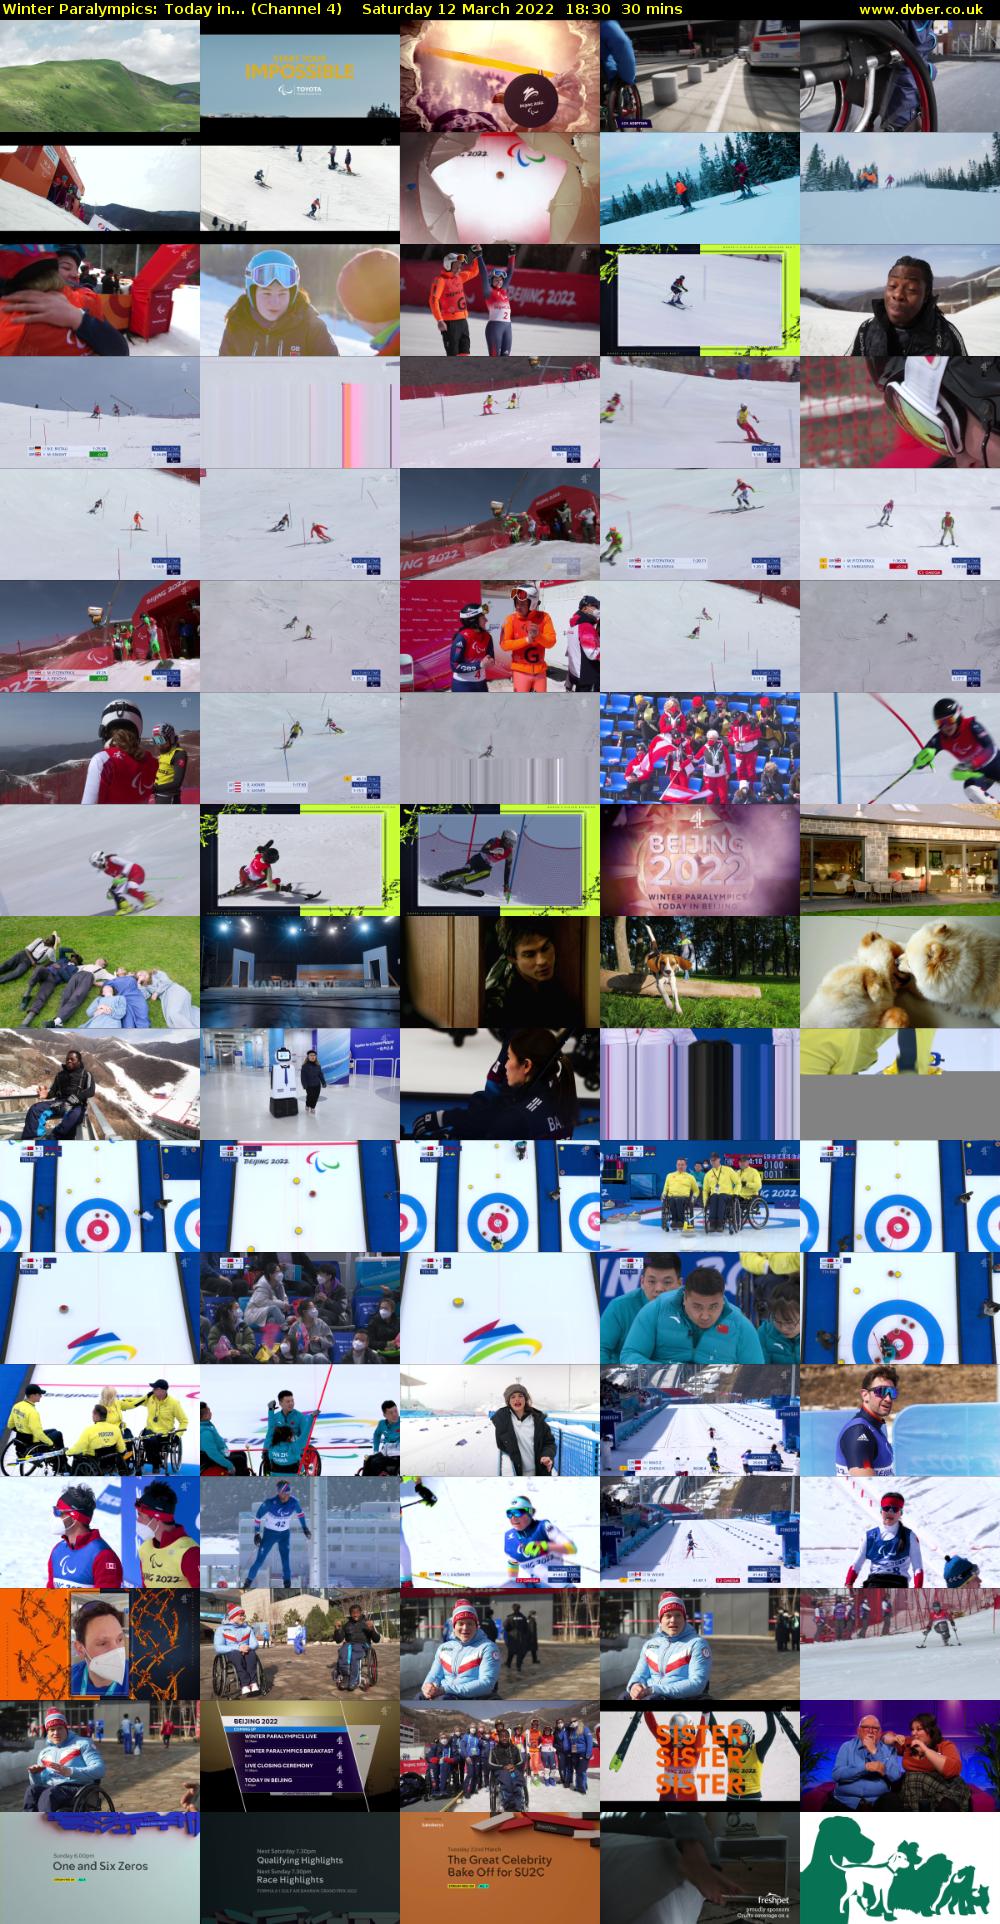 Winter Paralympics: Today in... (Channel 4) Saturday 12 March 2022 18:30 - 19:00